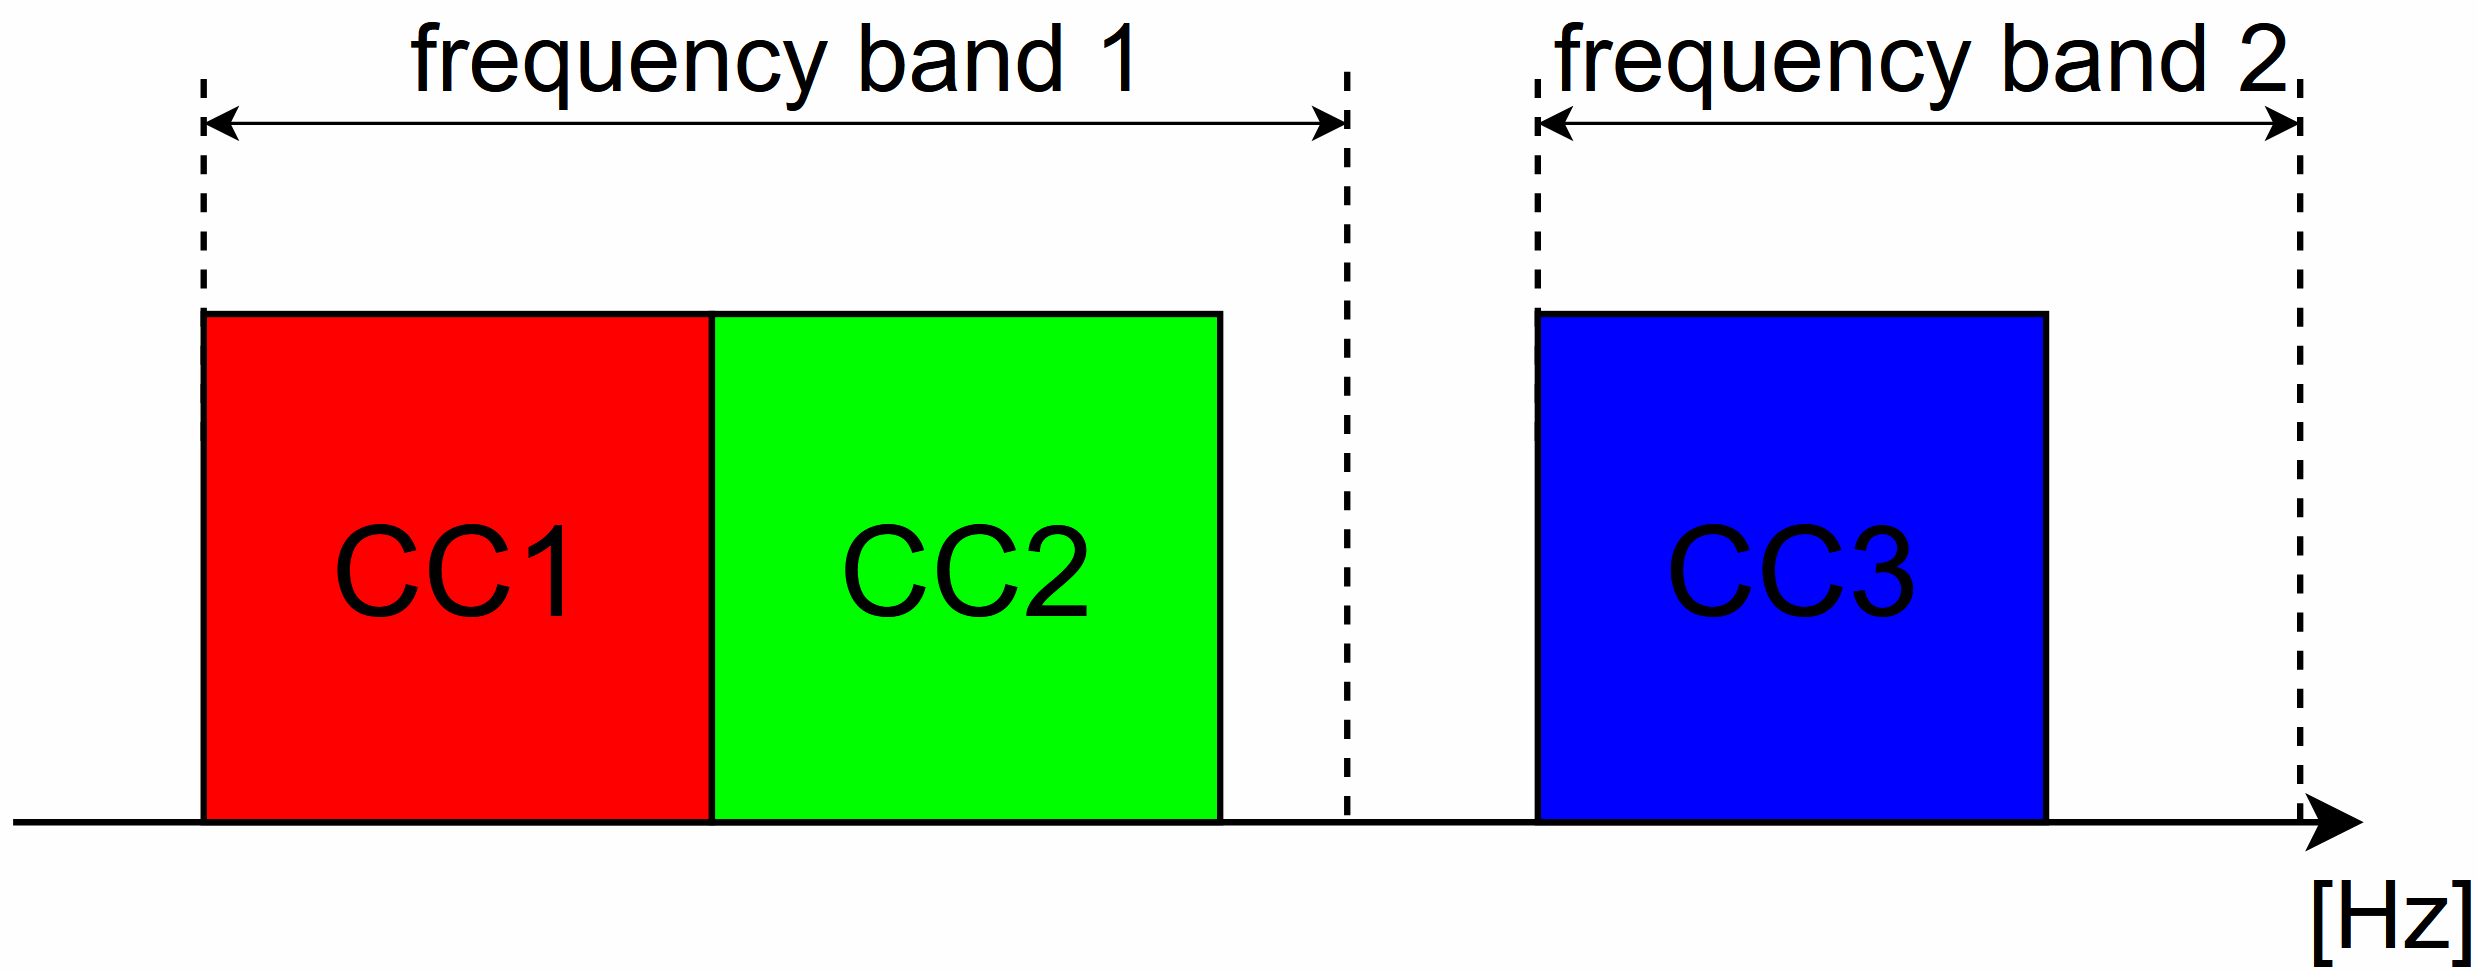 Frequency band 1